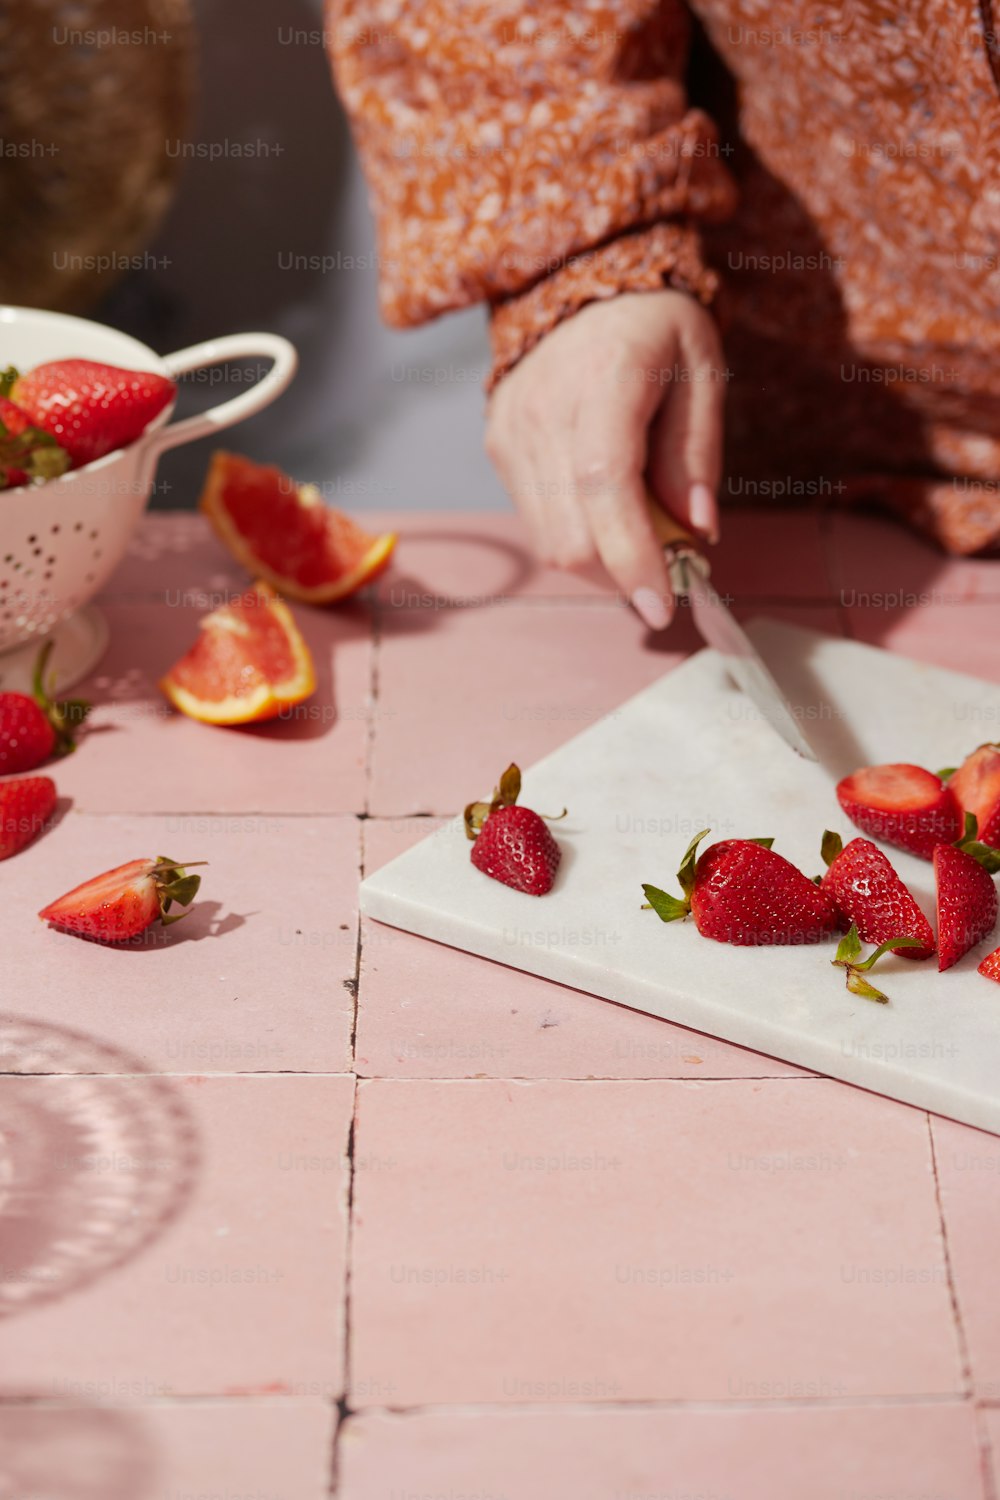 a person cutting strawberries on a cutting board